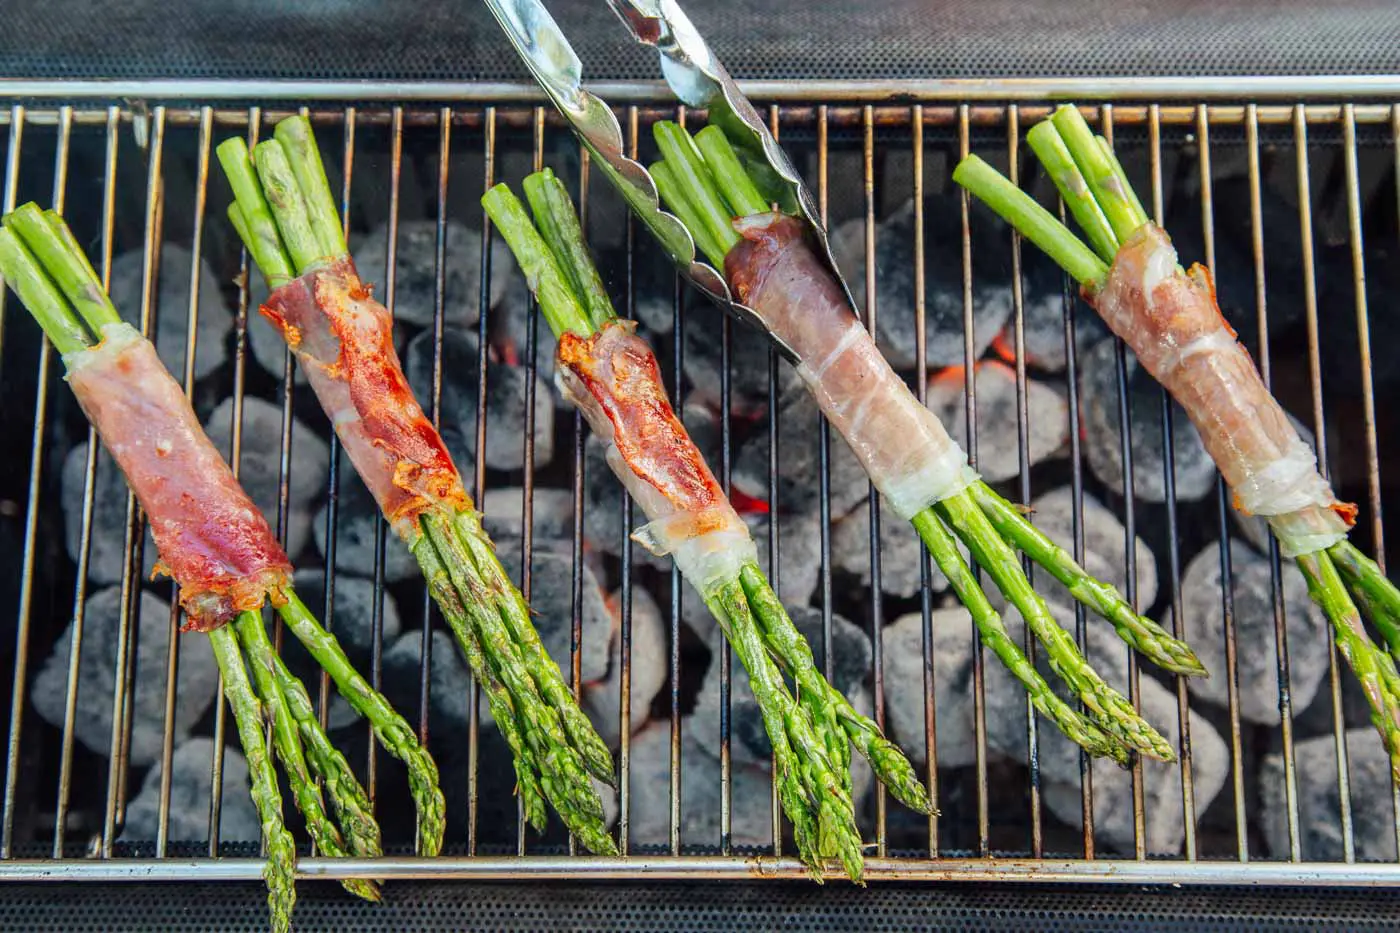 Prosciutto wrapped asparagus bundles on a grill